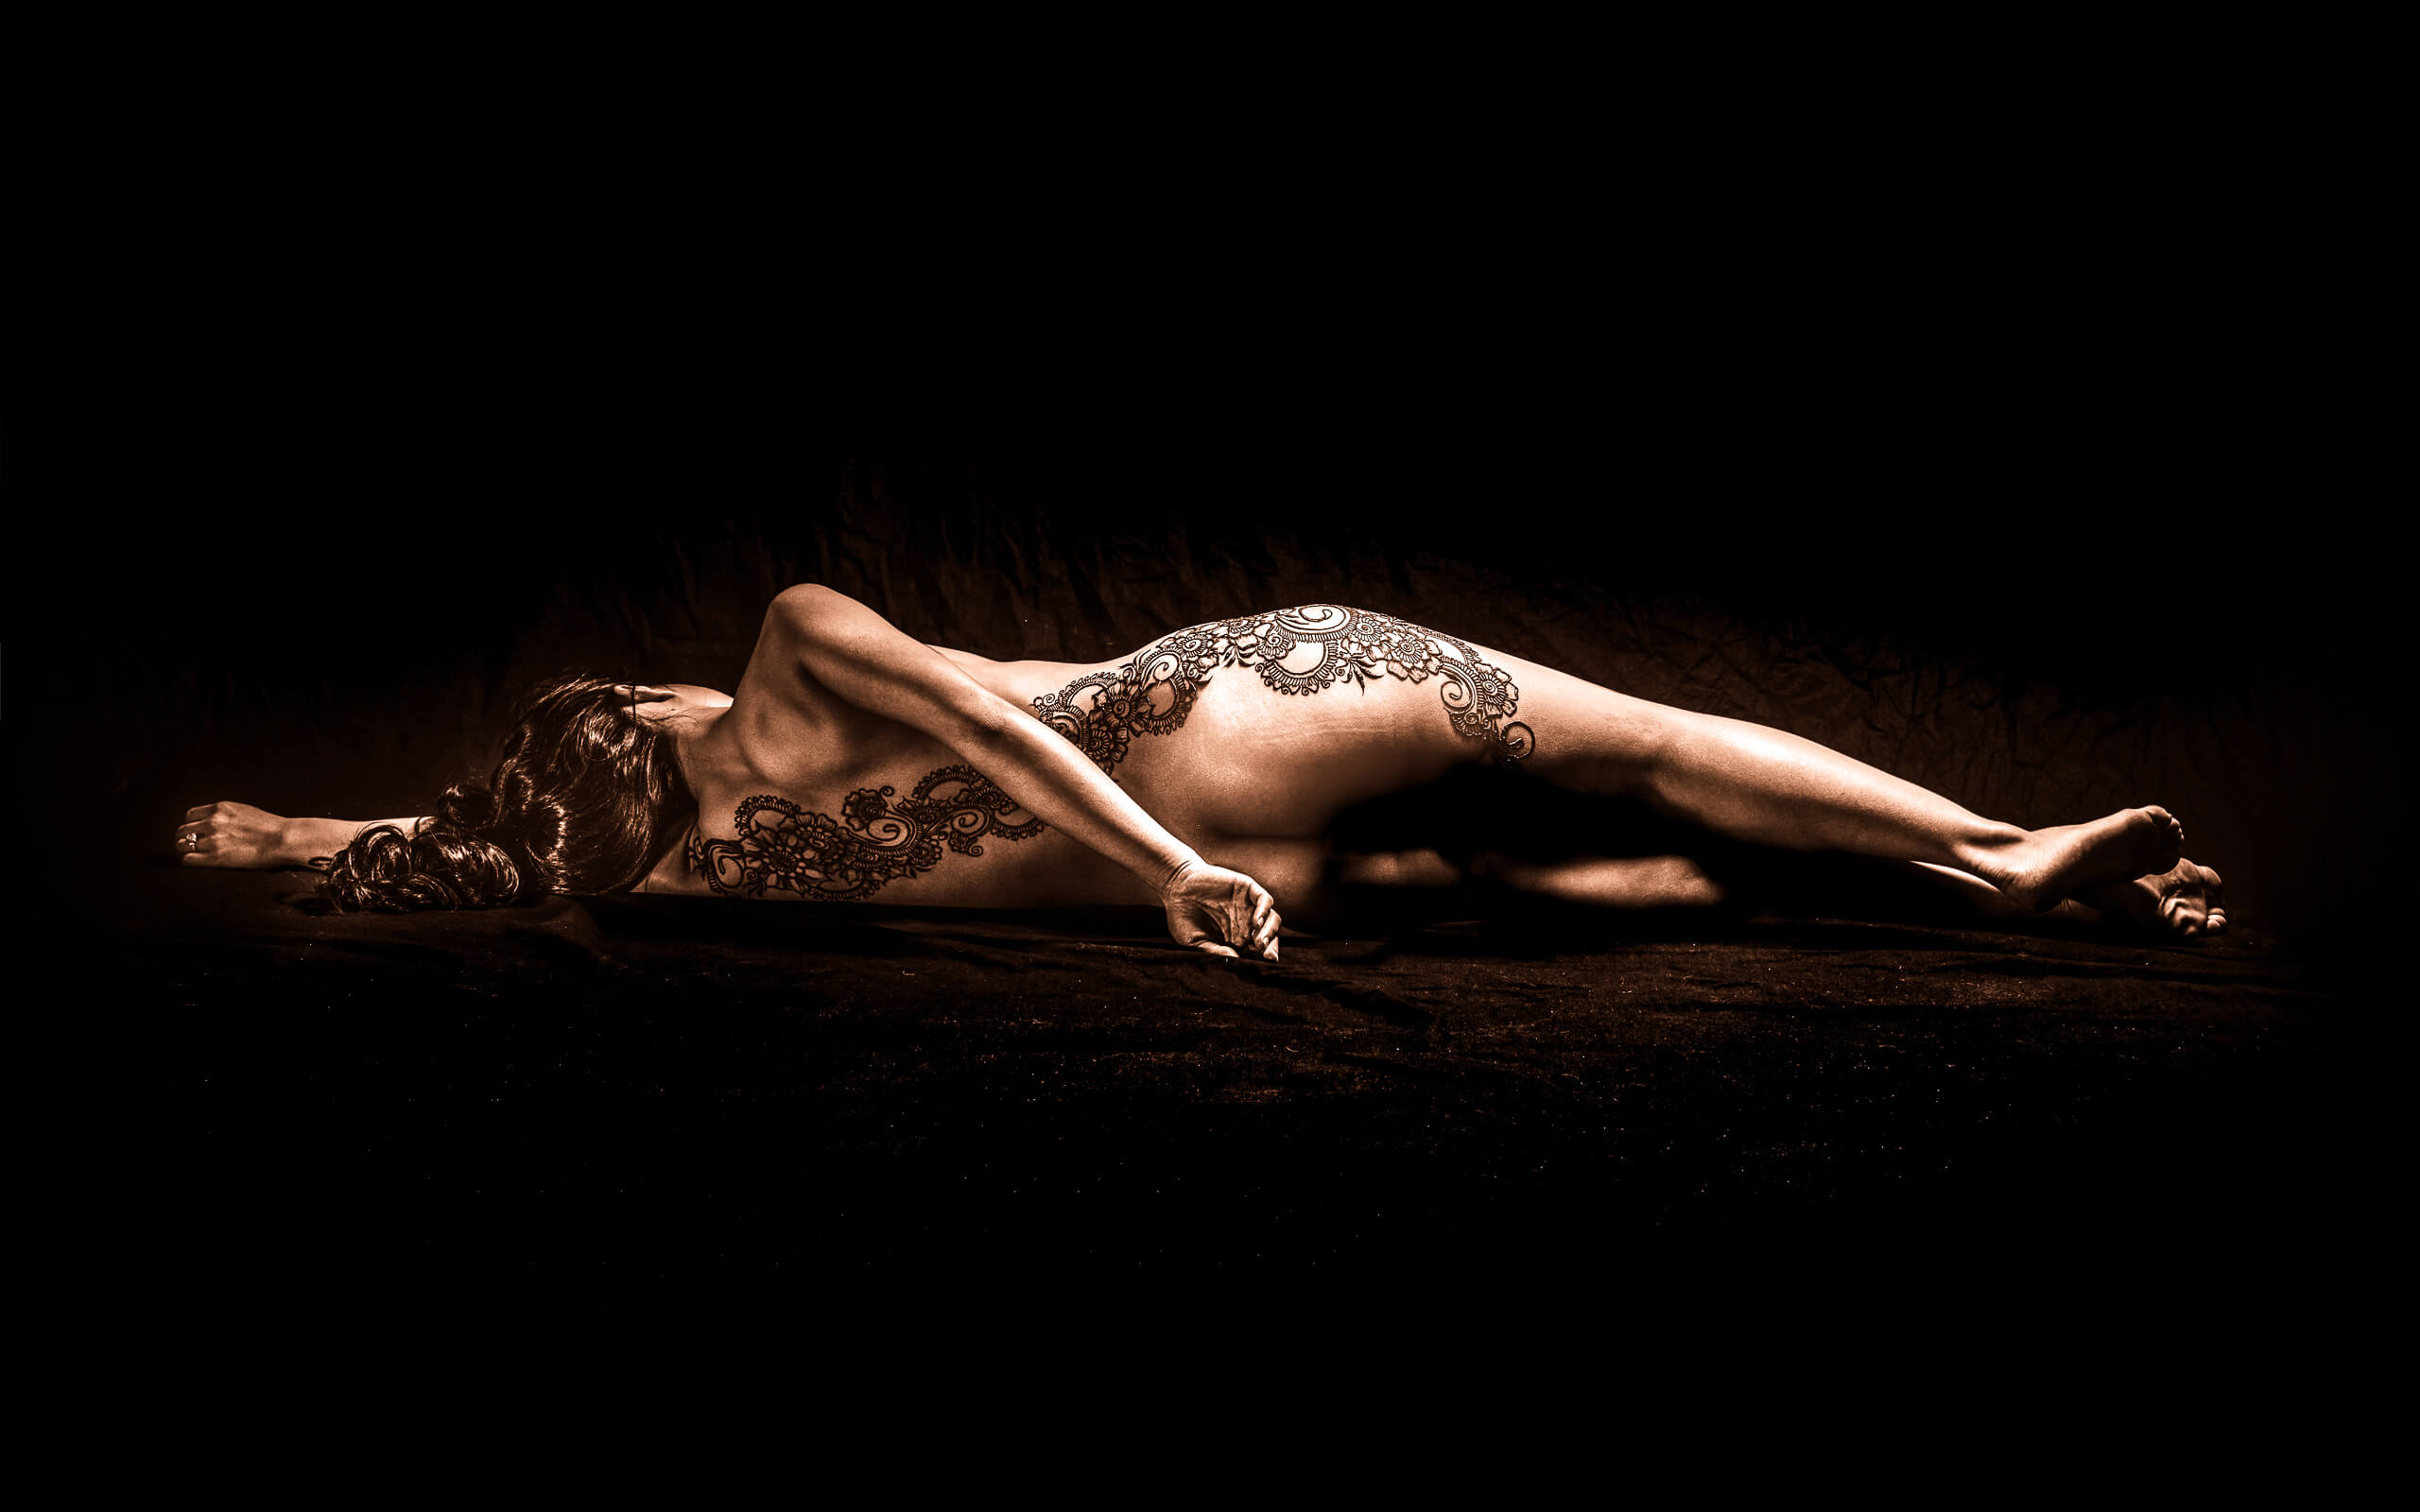 Portrait Photography. Boudoir photography sessions of a nude woman with henna on her back.